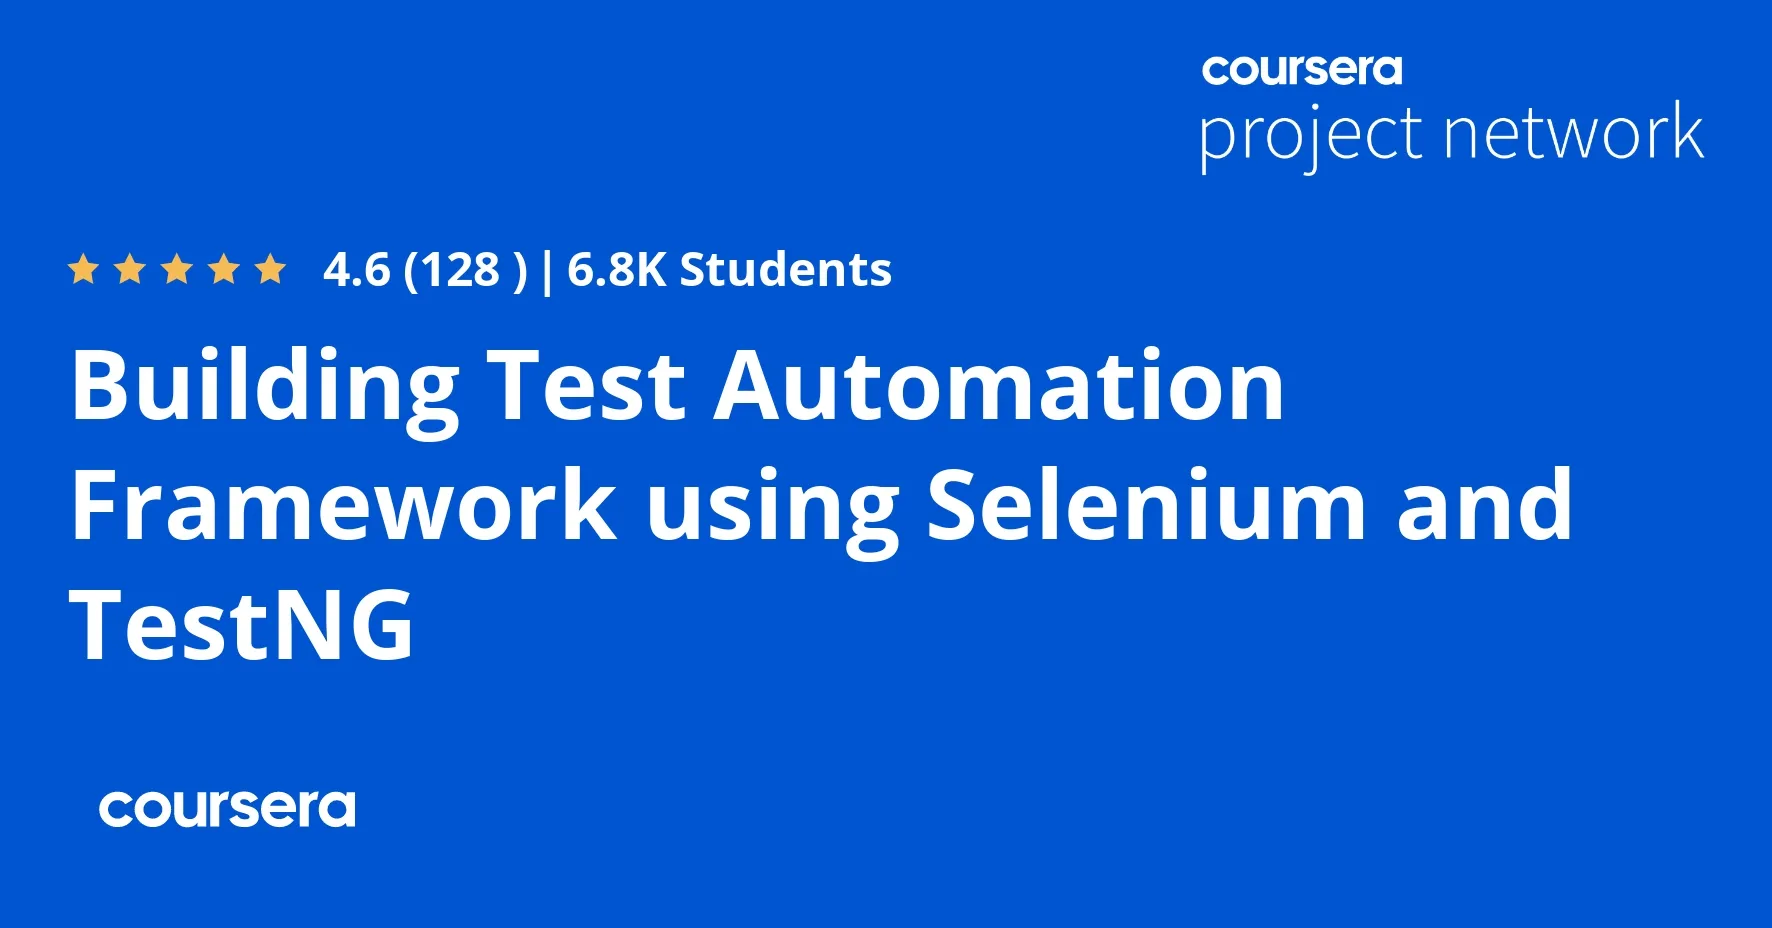 Building Test Automation Framework using Selenium and TestNG